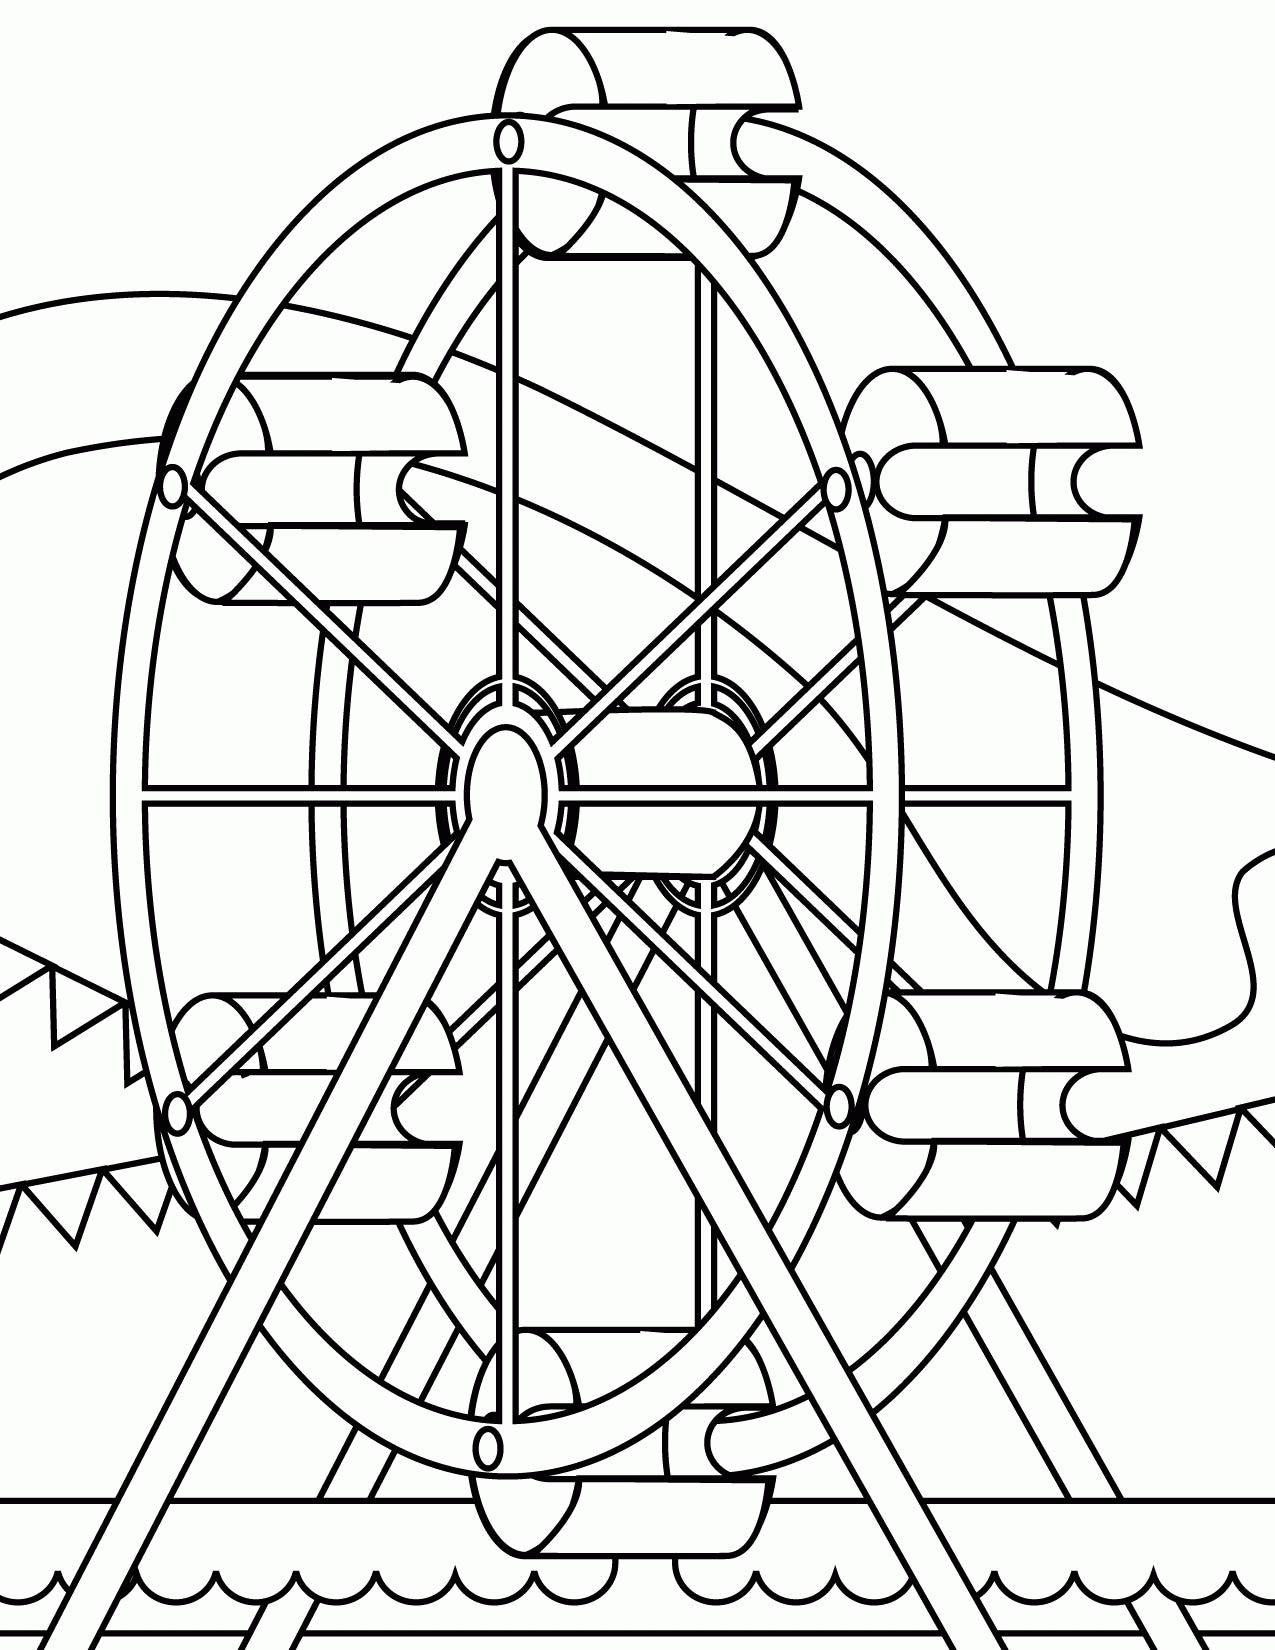 Ferris Wheel Coloring Page - Coloring Home